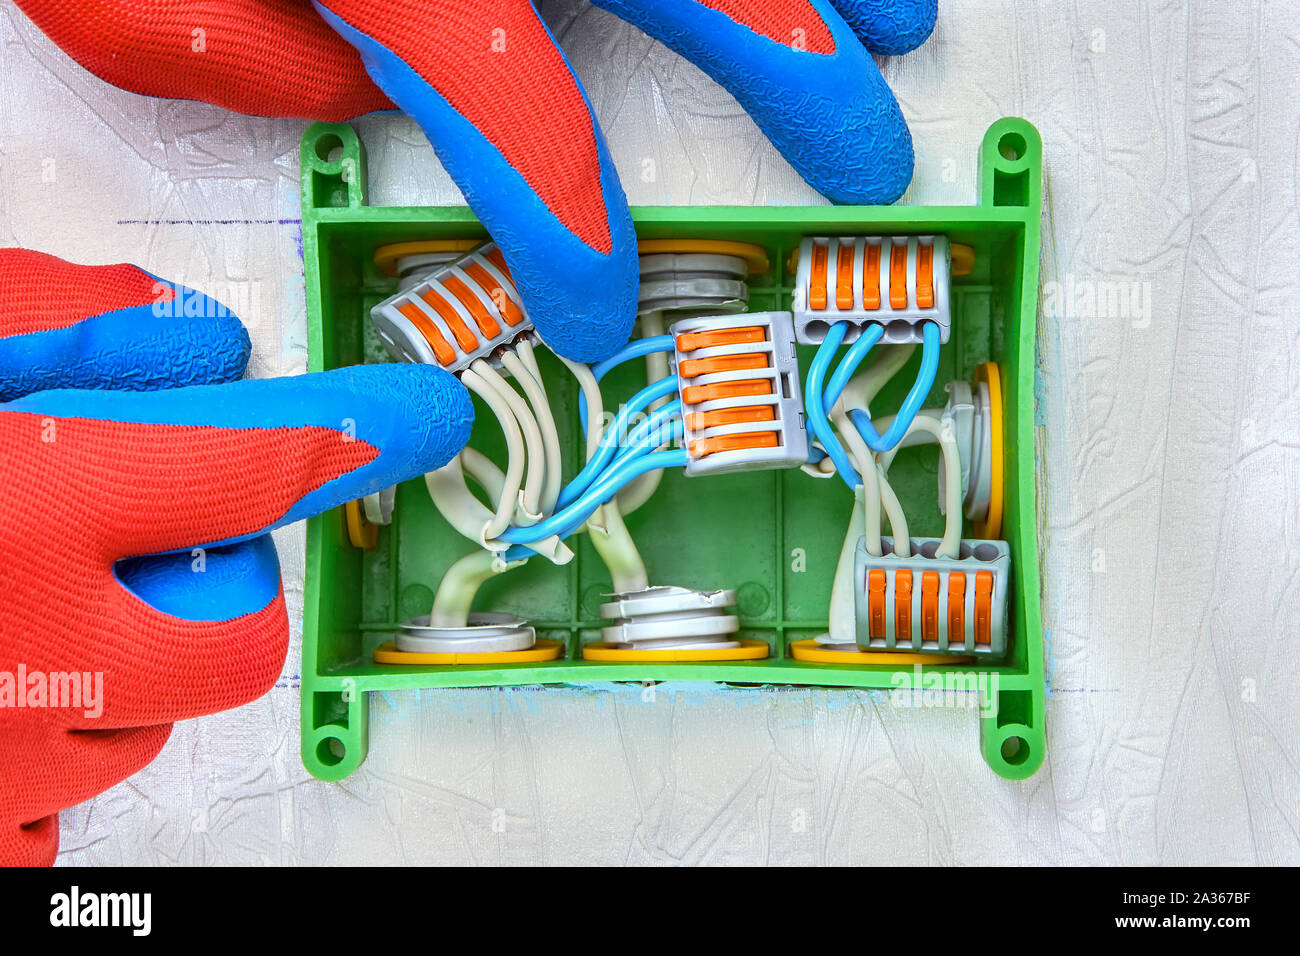 Electrical work. An electrical terminal block with push lever, used to connect and extend the wires inside a rectangular plastic junction box. Distrib Stock Photo